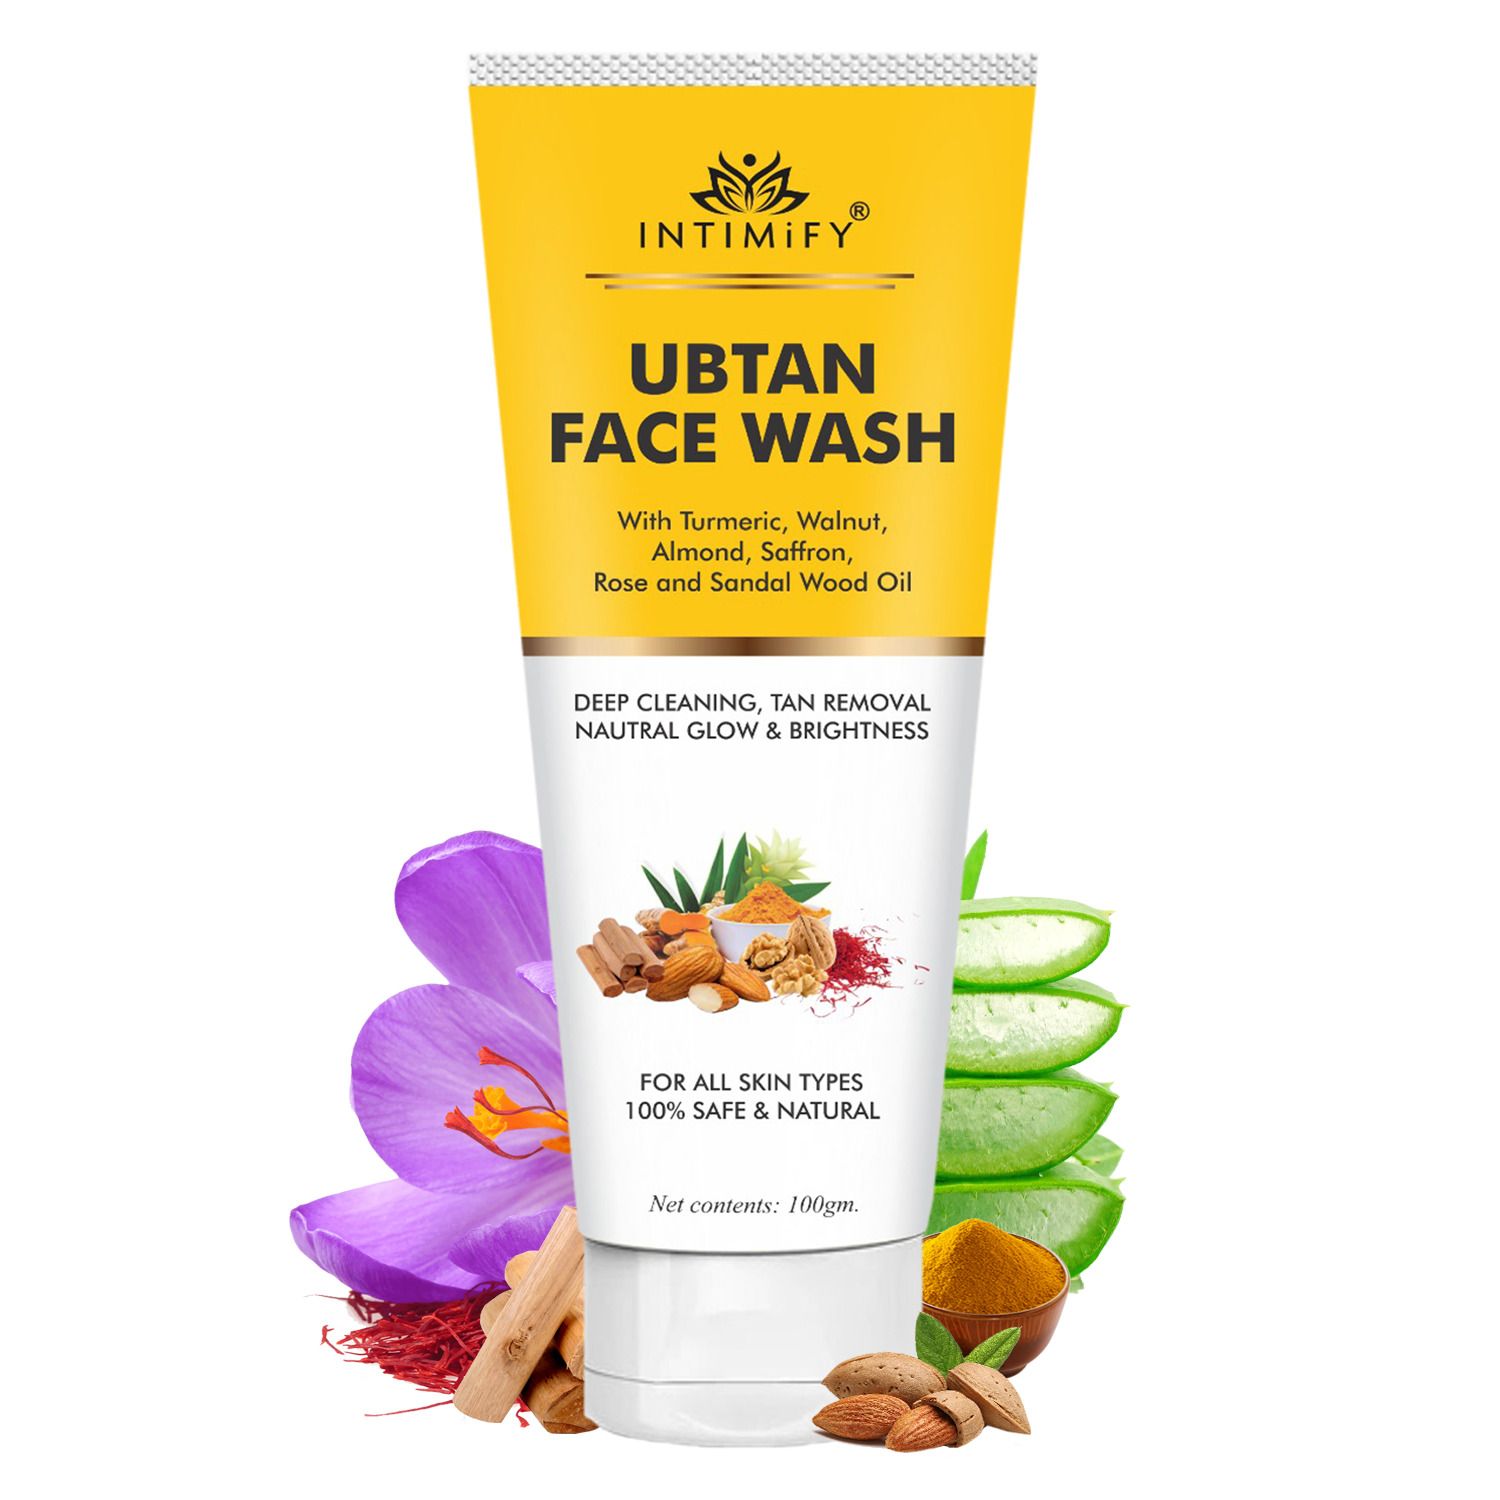 Intimify Ubtan Face Wash, face wash, anti aging face wash, skin brightening face wash, 100 gm